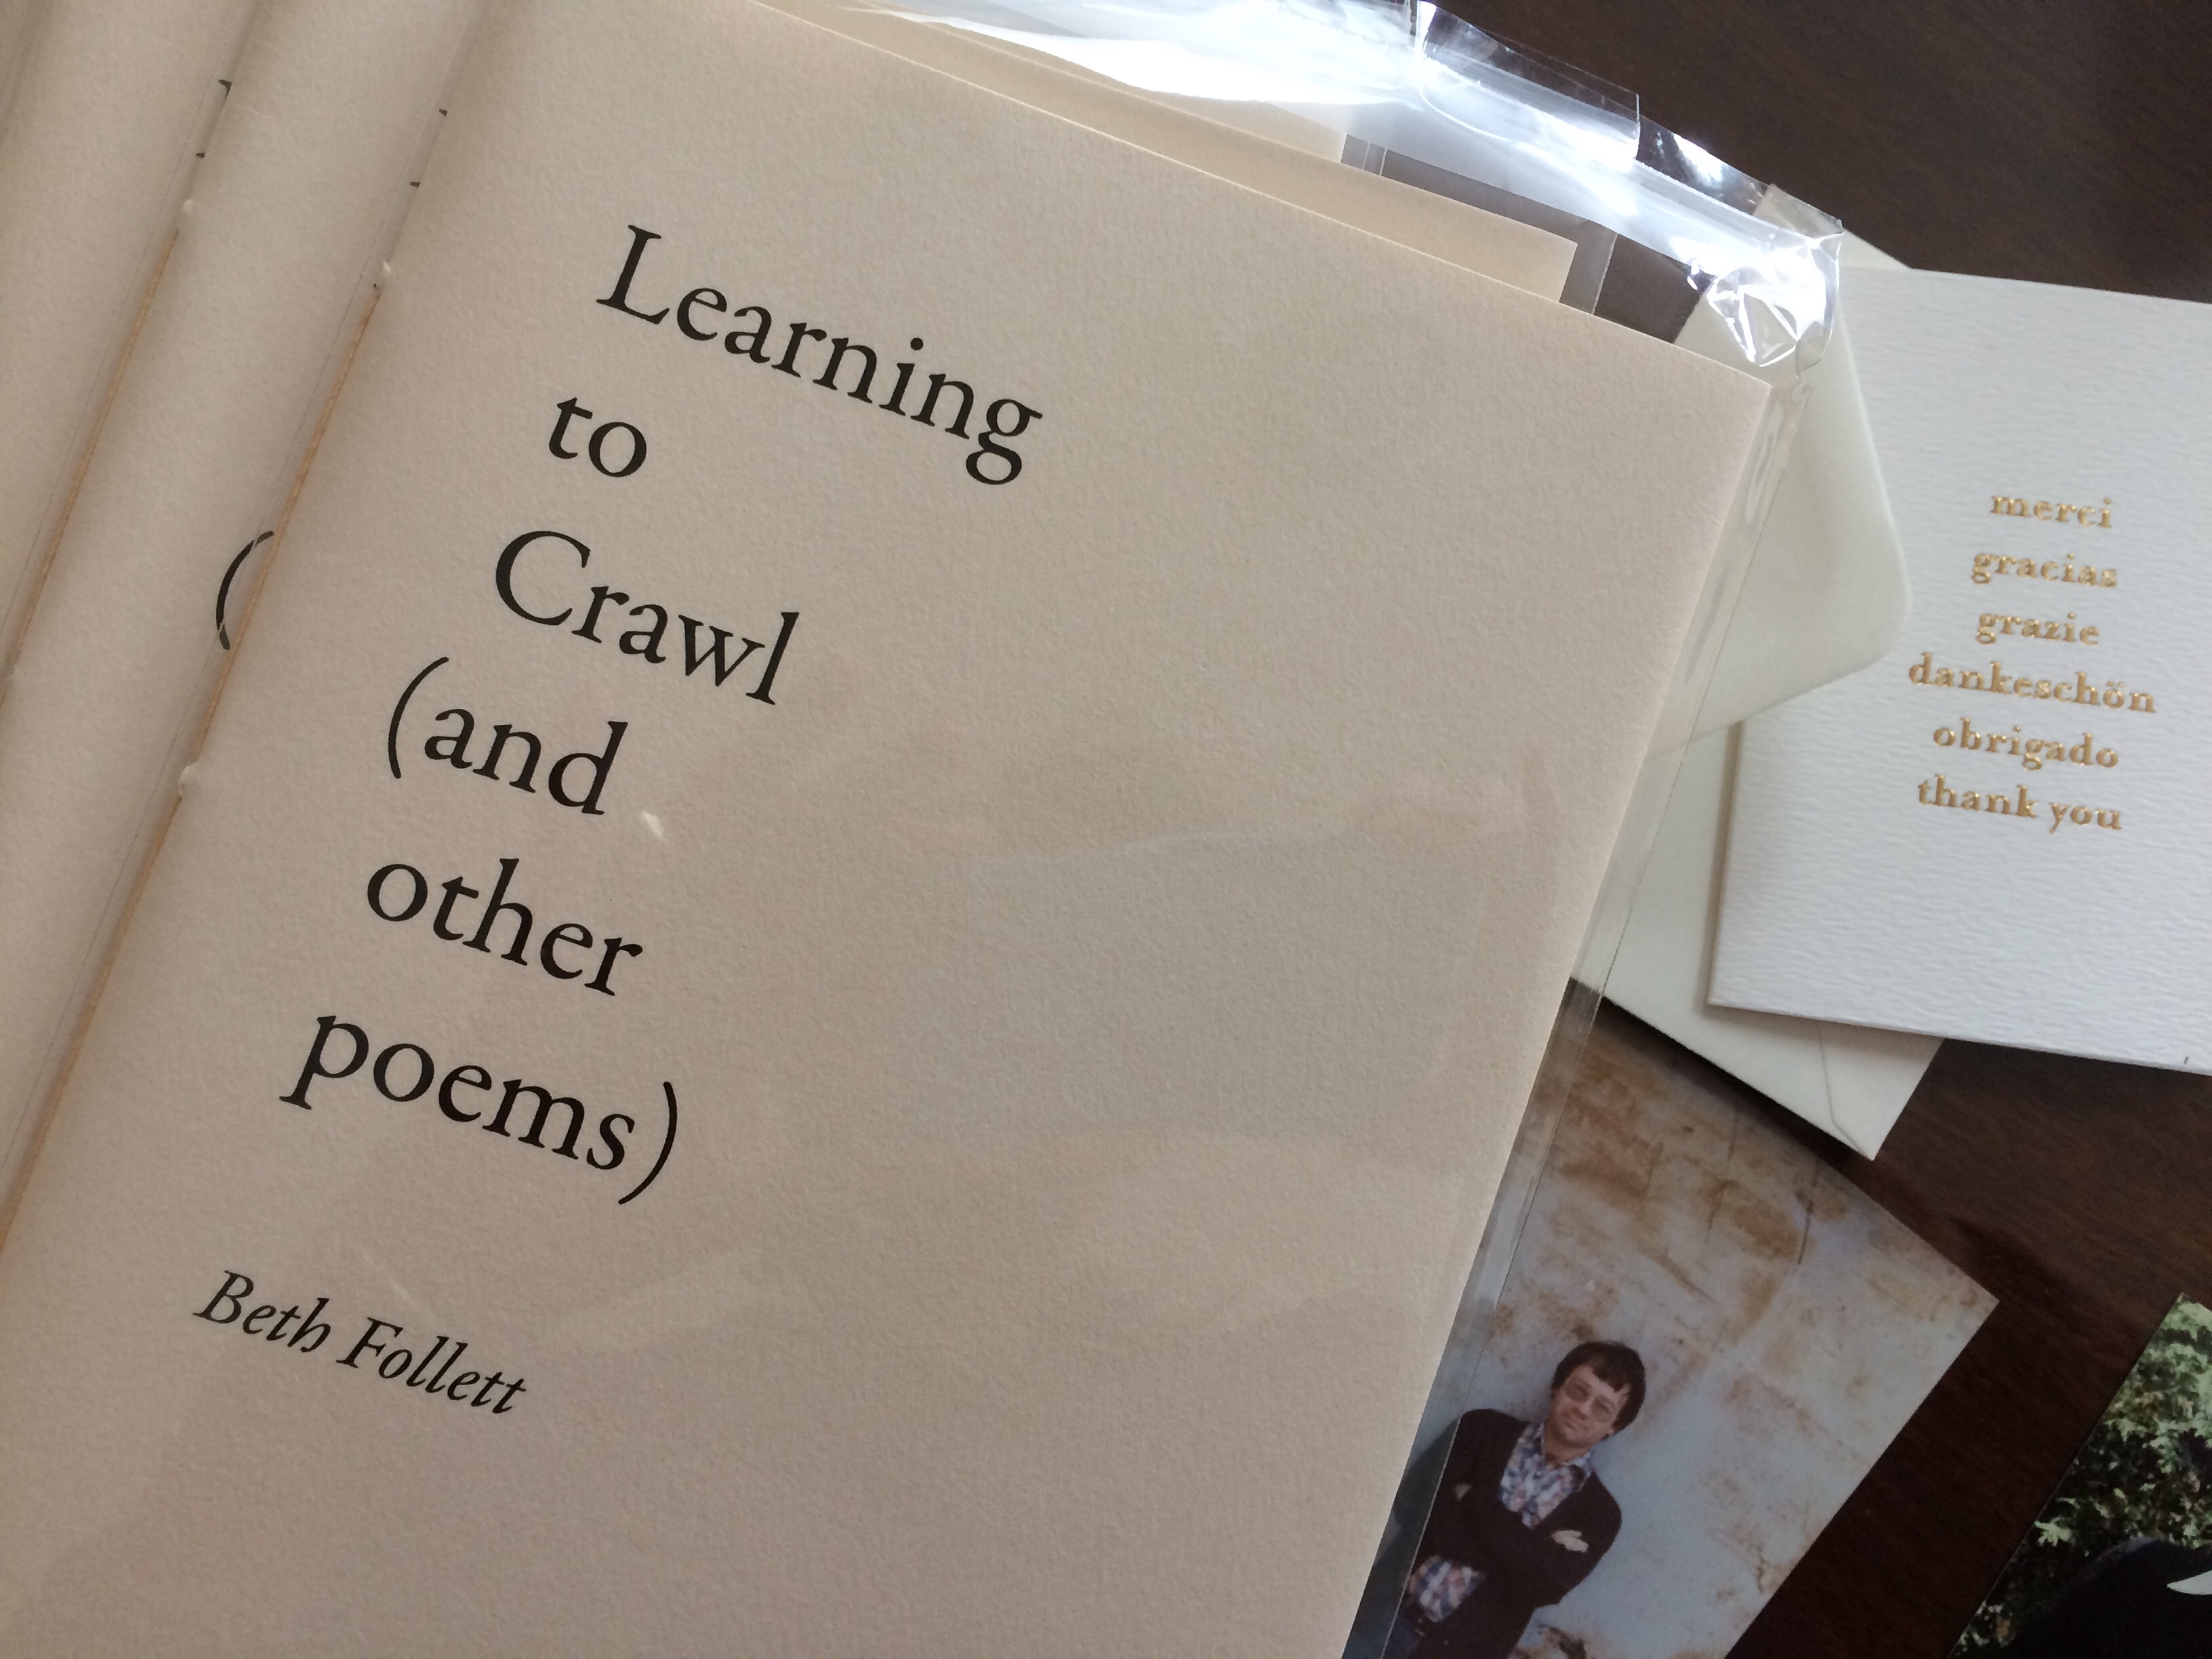 Image of the cover of the Apt. 9 chapbook entitled Learning to Crawl (and Other Poems).